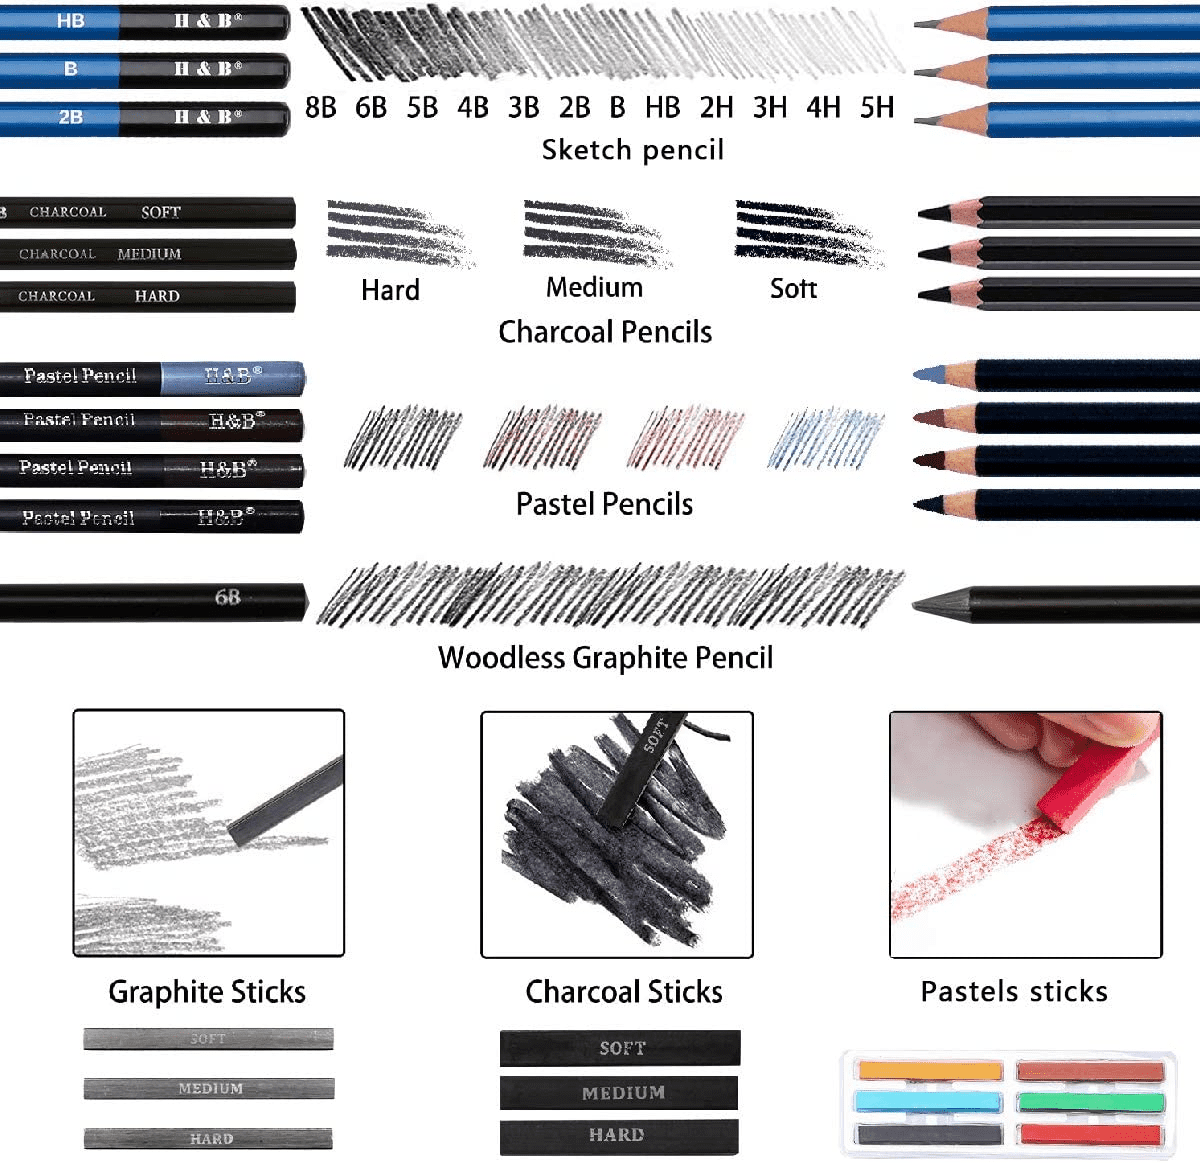 HTI Fairfax & Co 72 Piece Pencil Sketching Set with Portable Case  Premium  Quality Drawing Pencils Artists Drawing and Sketching Pencil Set with Case  Shading & Colouring Pencils Set Art Tool